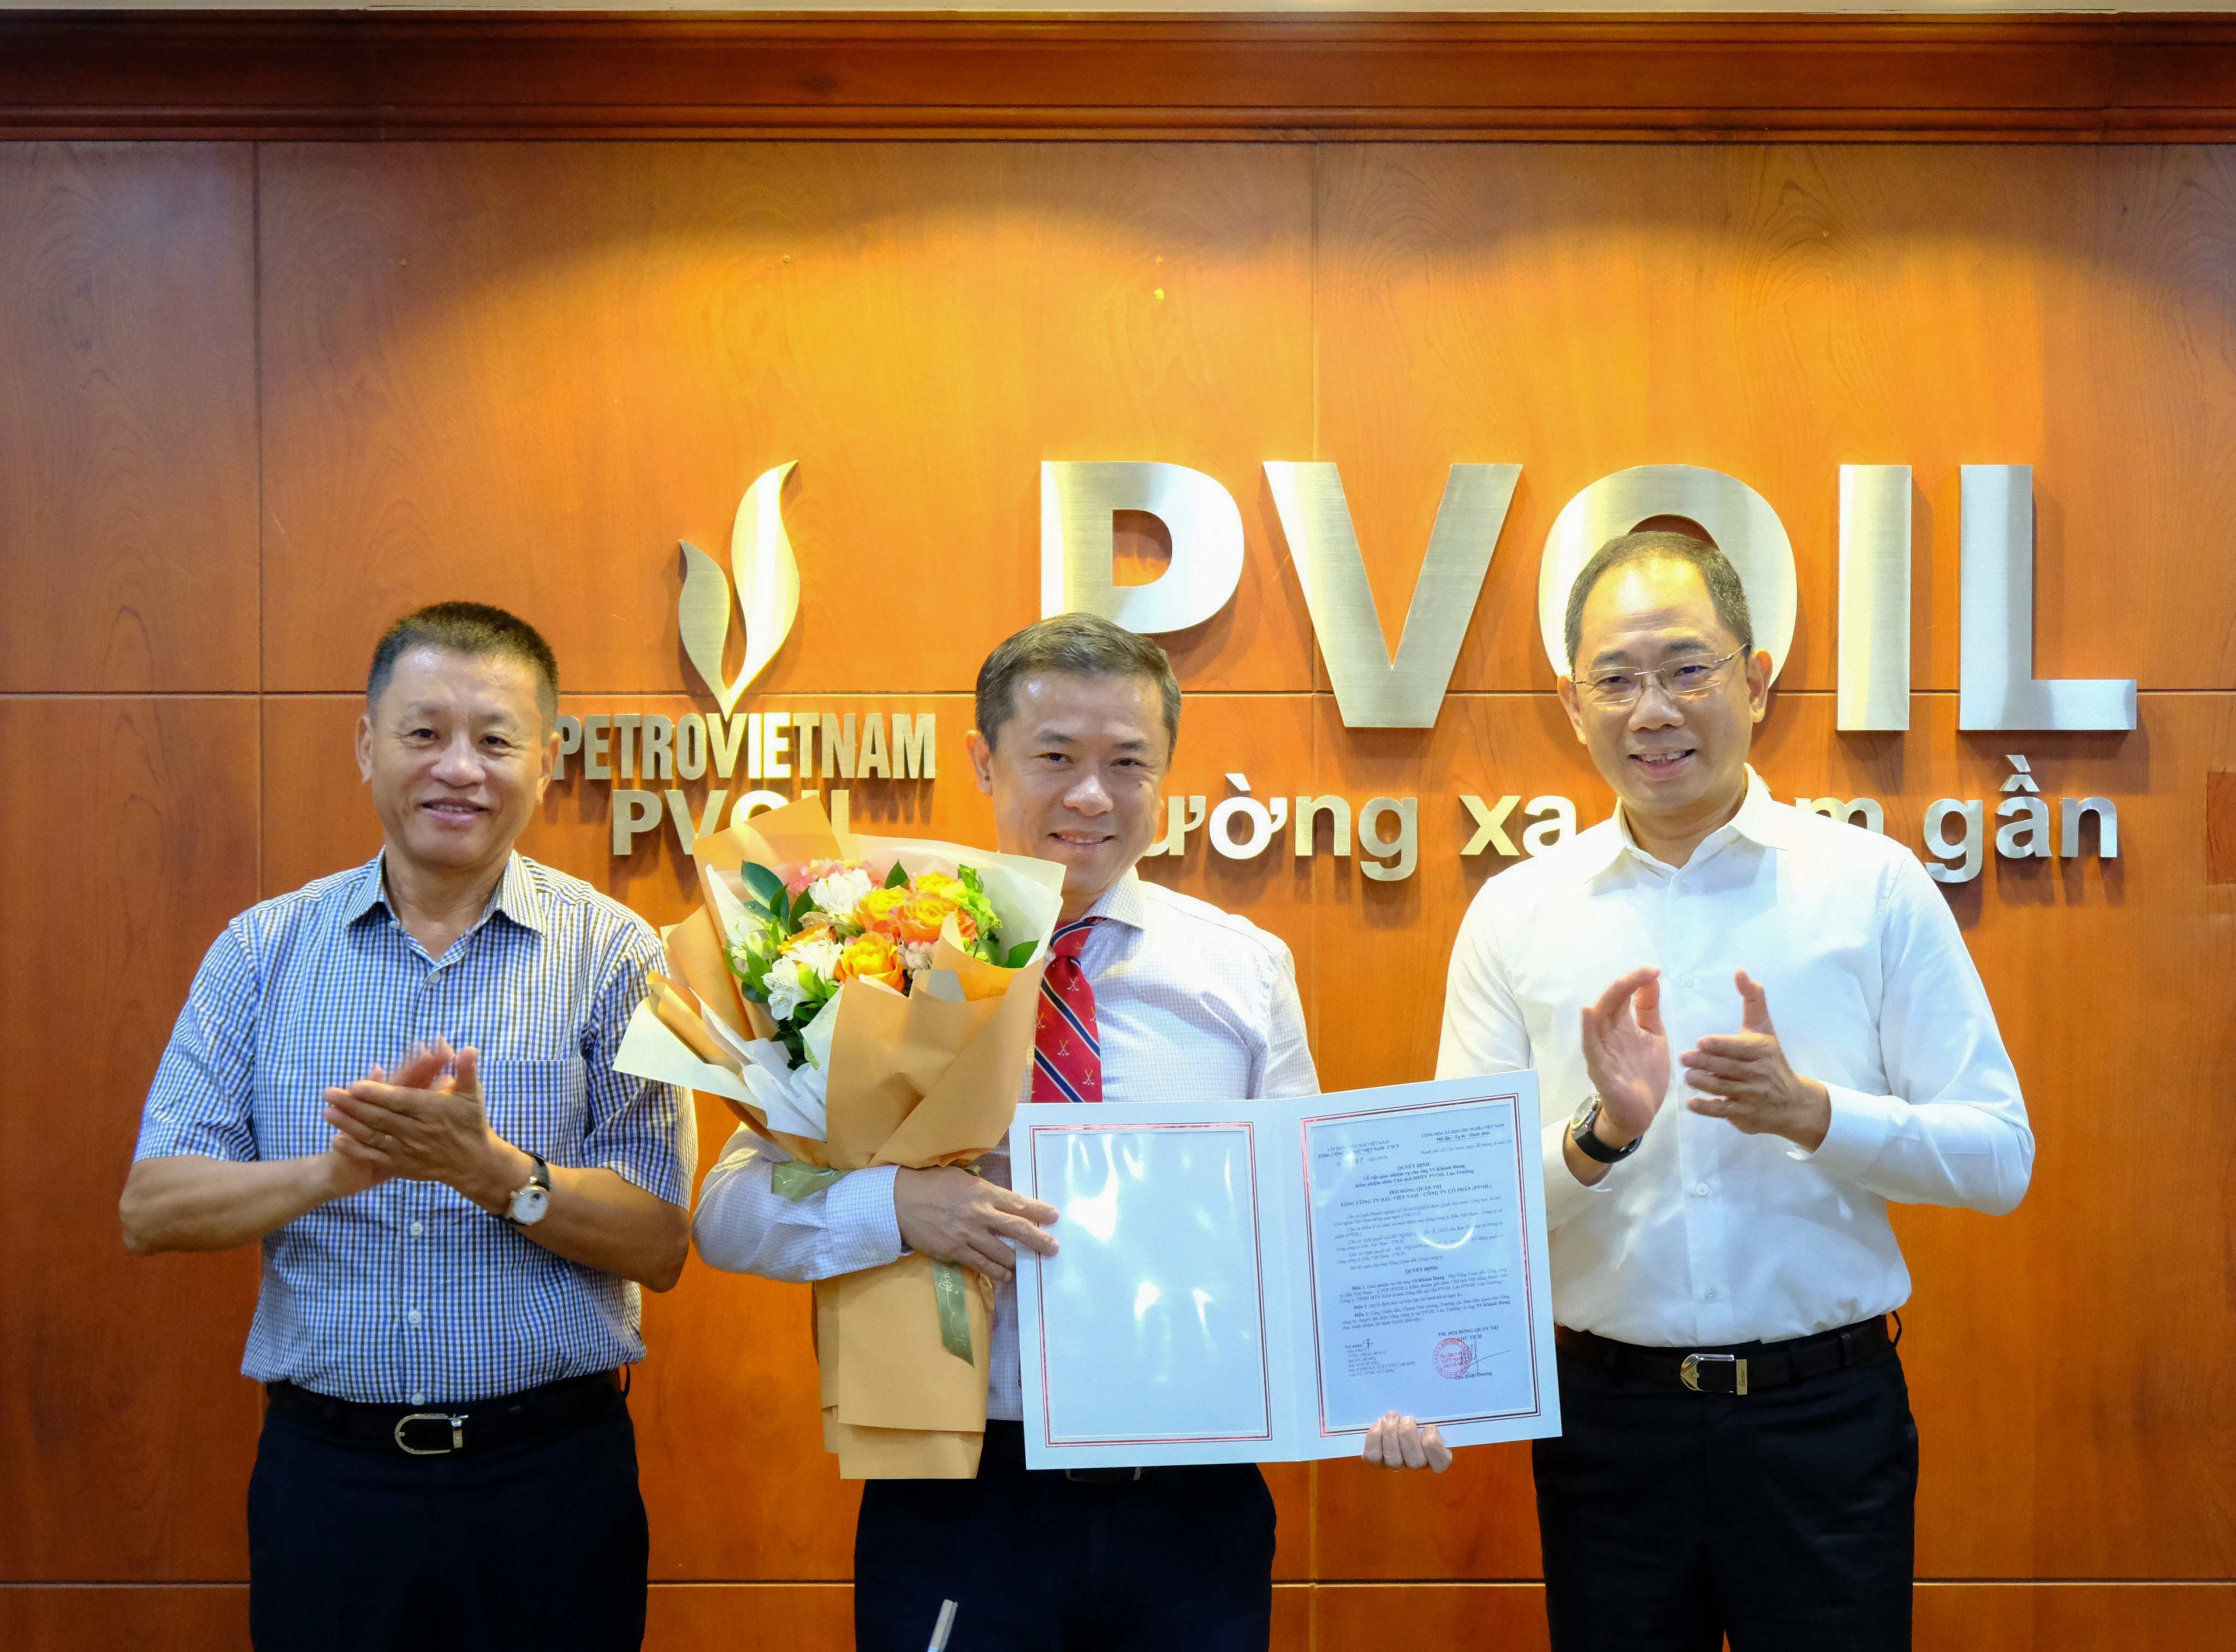 PVOIL Laos and PVOIL Laos Trading have new chairman of Board of Management